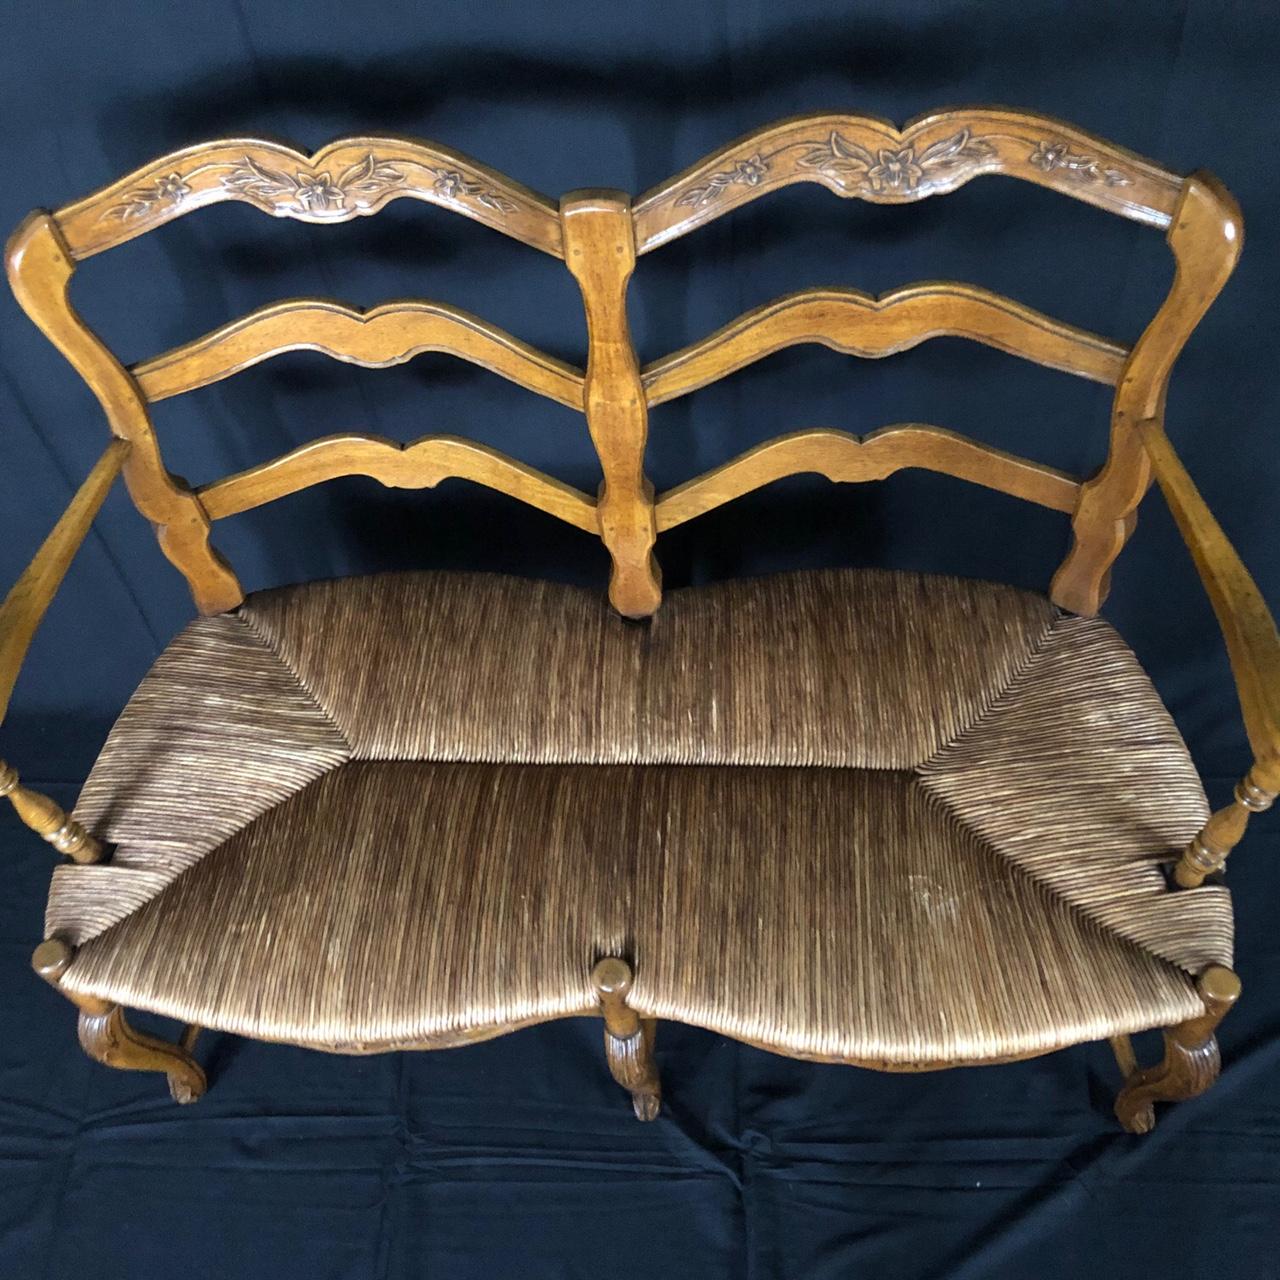 An exquisitely carved walnut ladderback bench from 19th century France having graceful curved arms with inset detail and subtle cabriole legs with acanthus leaves on knees and top. Intricate carving on stretcher, apron and top of backrest. Marvelous